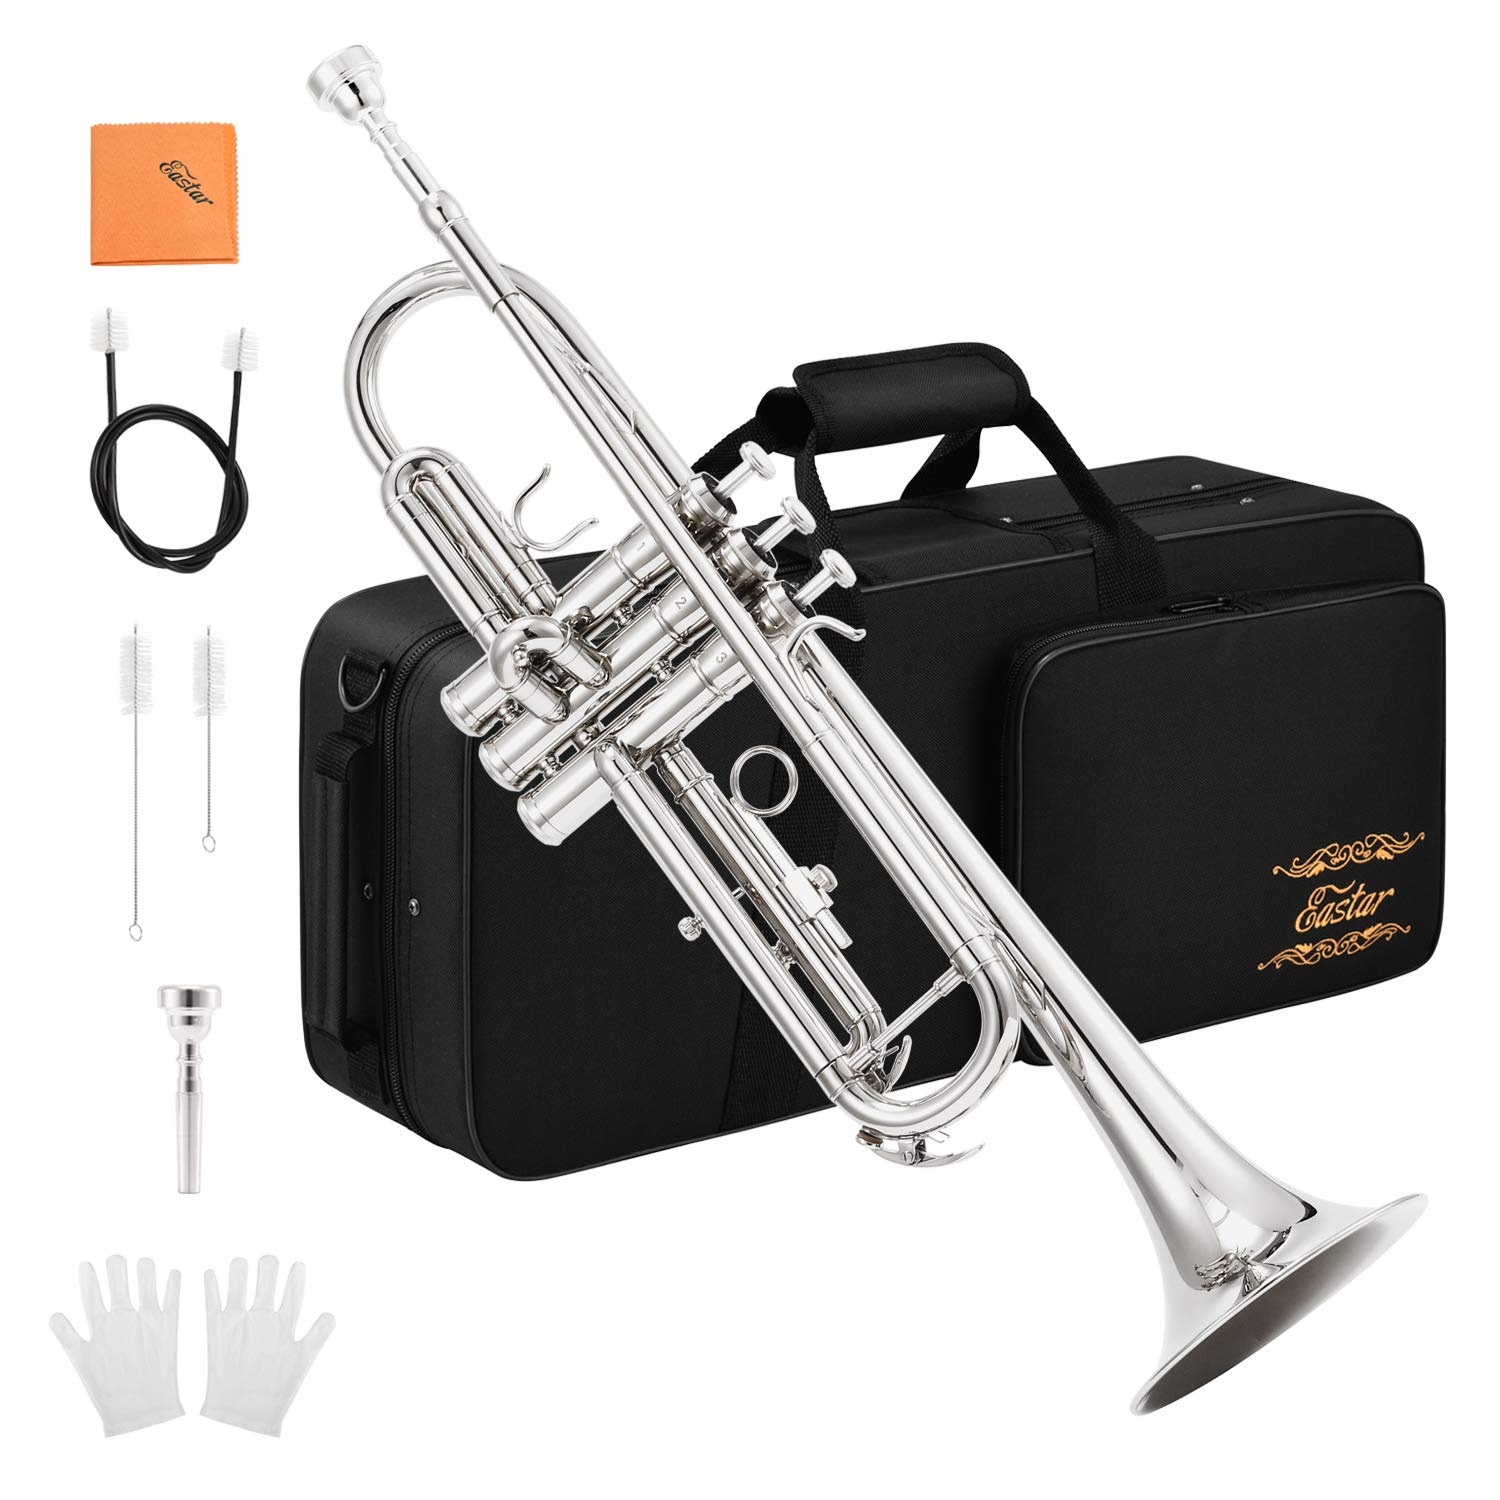 Eastar Bb Standard Trumpet Set for Beginner, Brass Student Trumpet Instrument with Hard Case, Cleaning Kit, 7C Mouthpiece and Gl